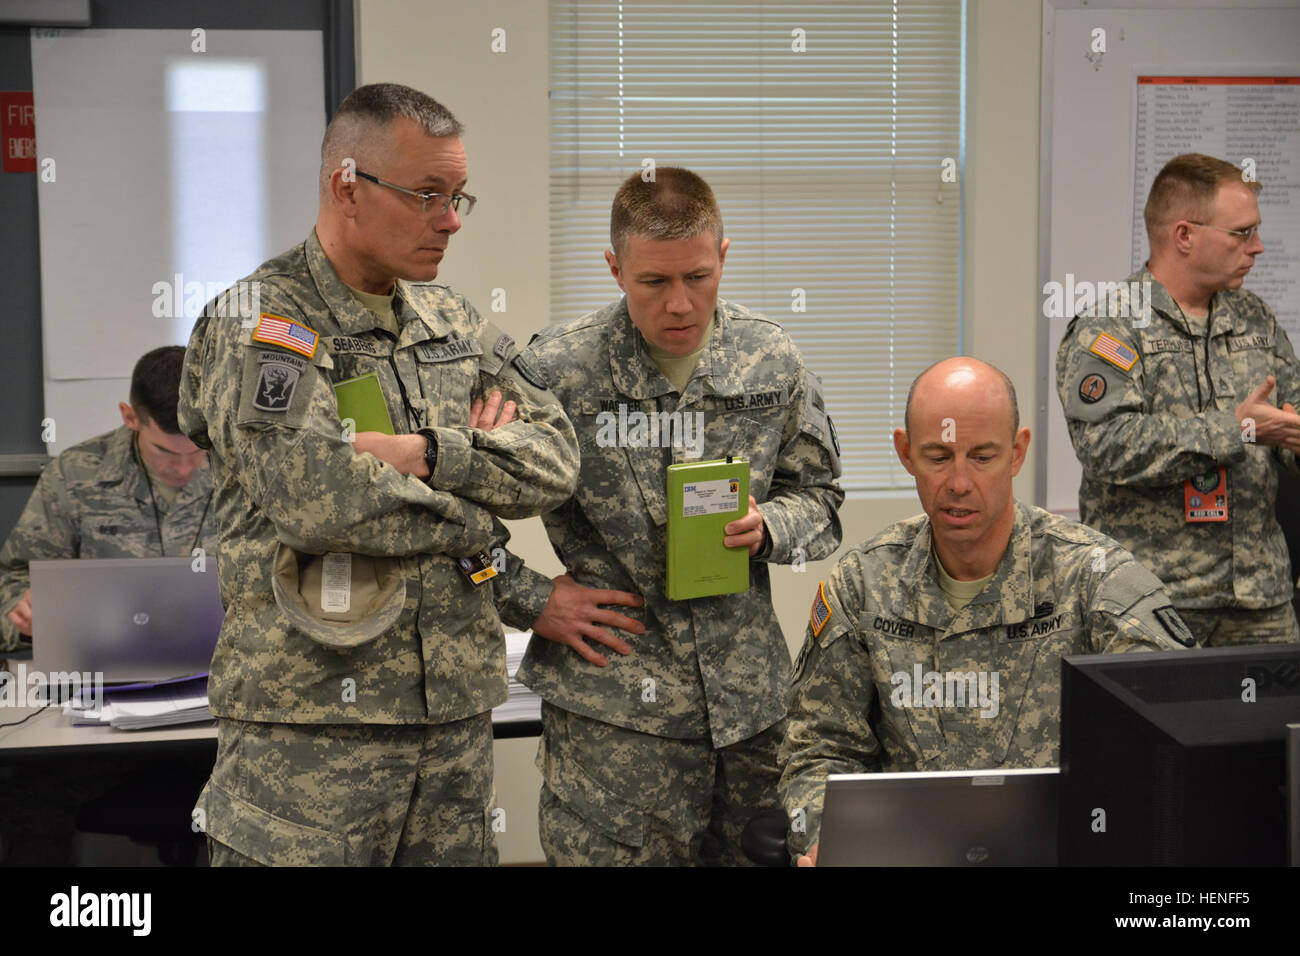 Right to left) Chief Warrant Officer 2 Christopher P. Covey with